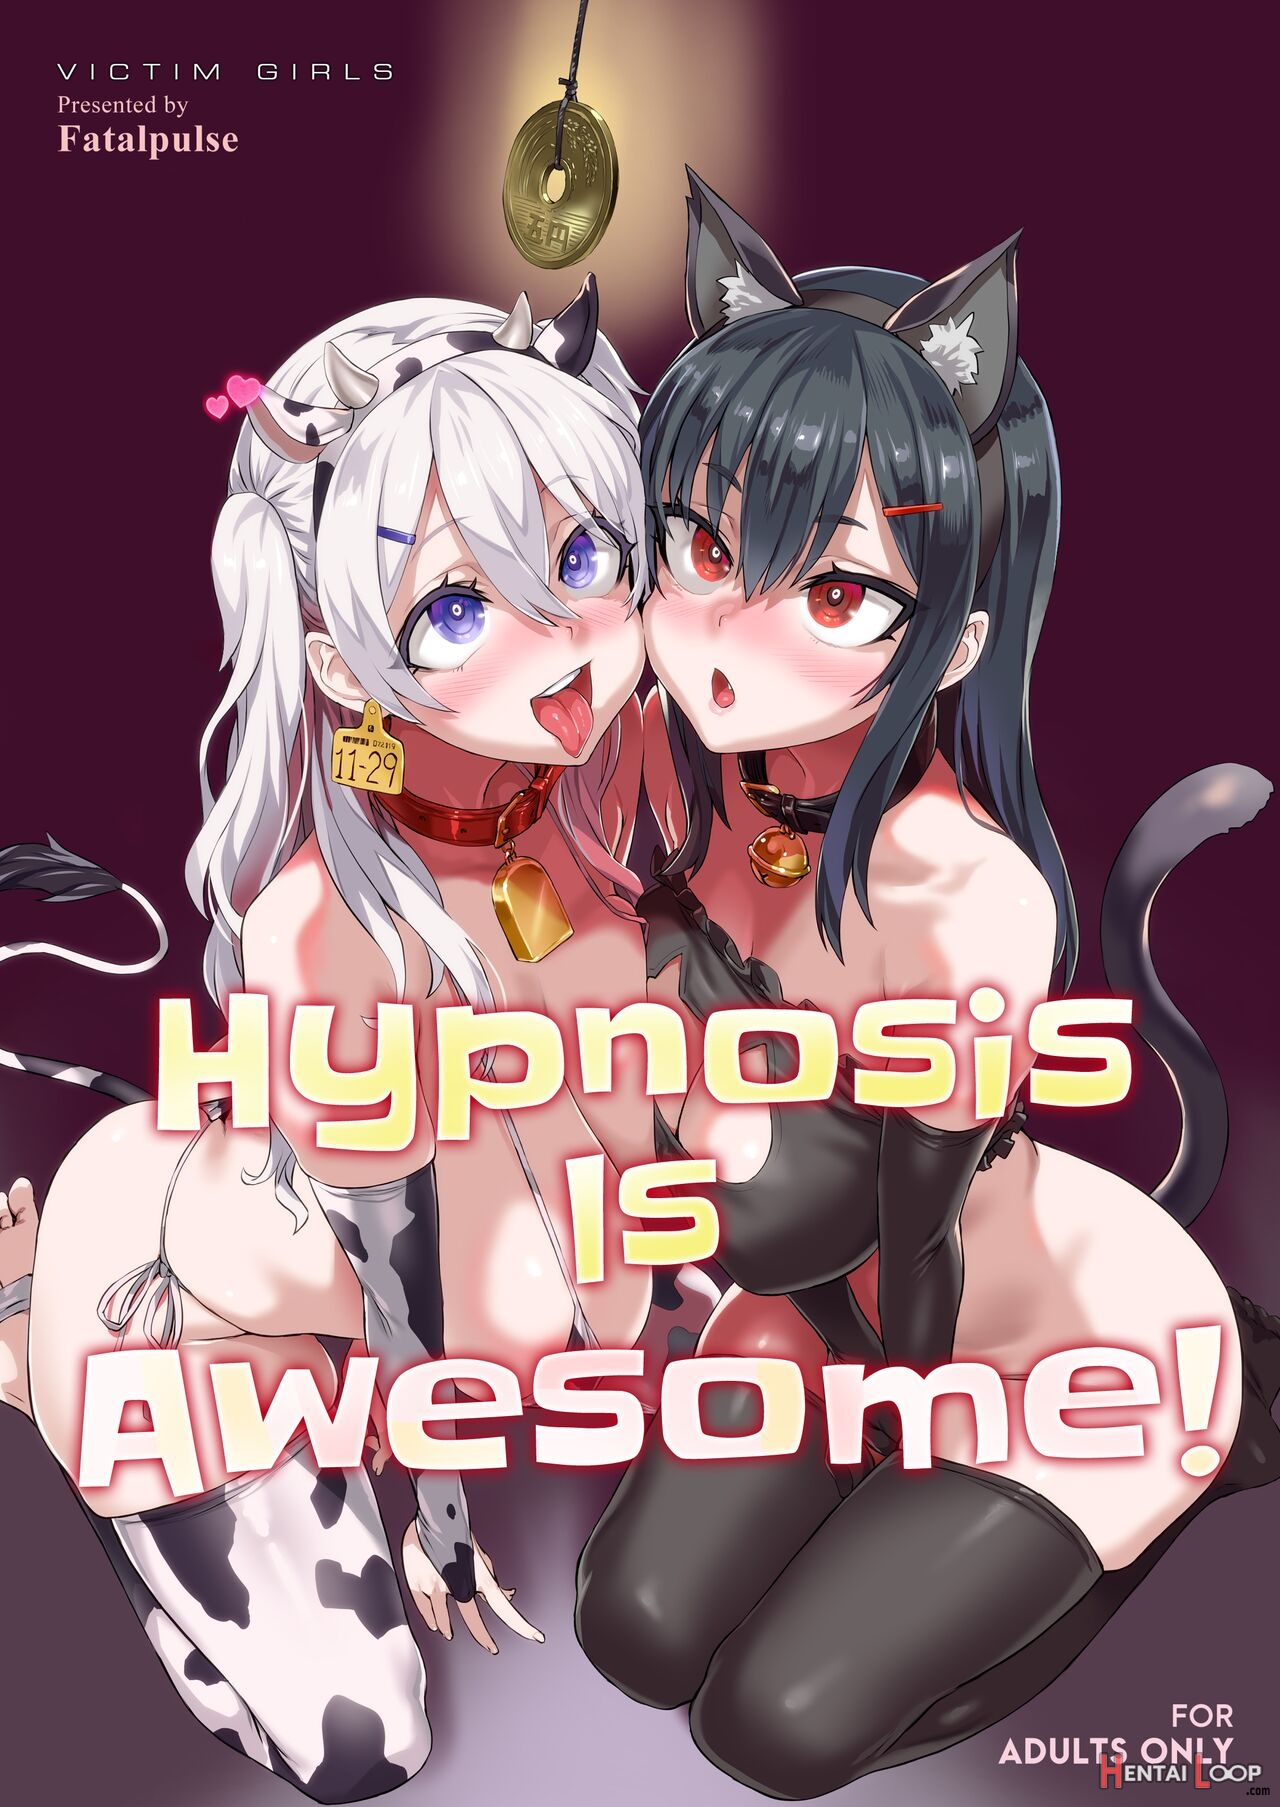 Hentai Hypnosis Porn - Hypnosis Is Awesome! (by Asanagi) - Hentai doujinshi for free at HentaiLoop